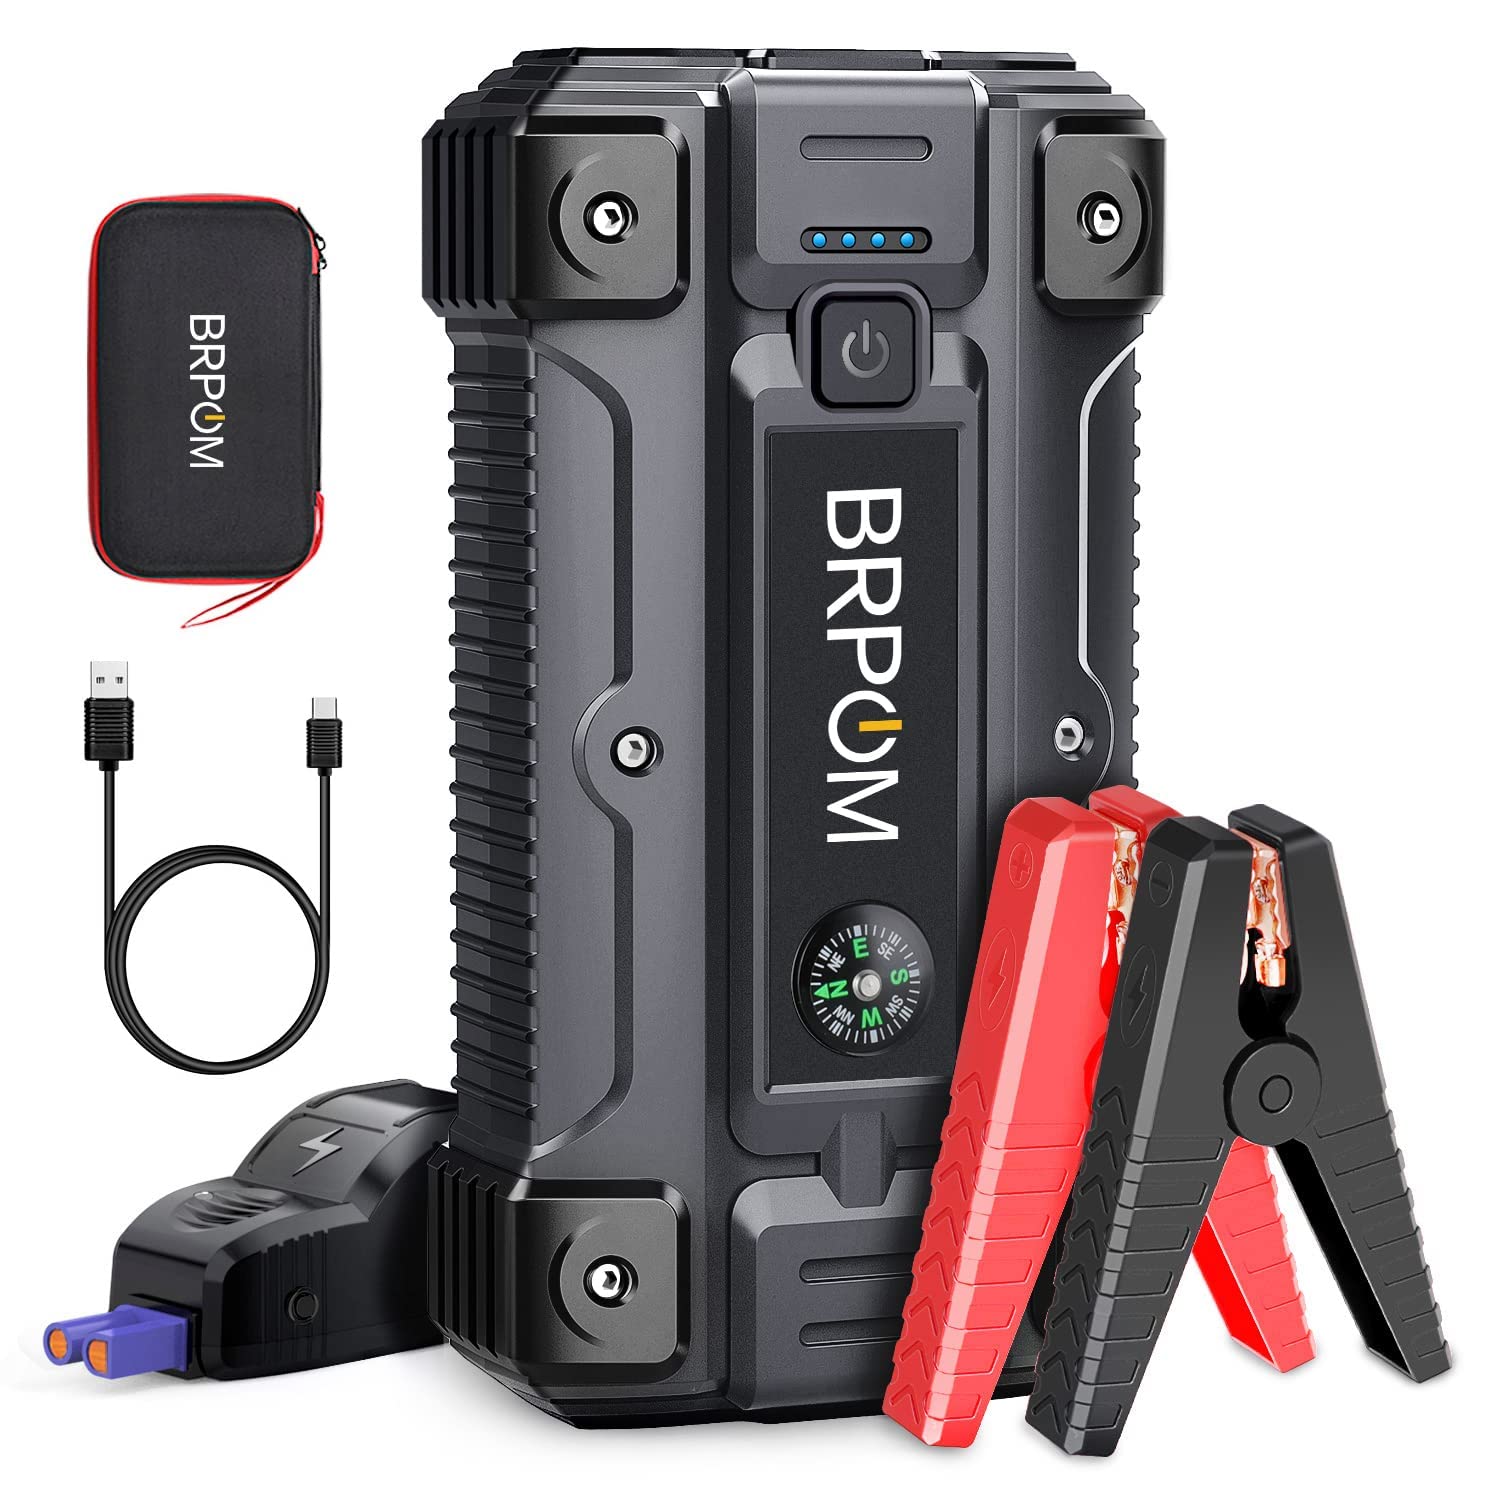 BRPOM car Jump Starter, 3000A Peak 23800mAh (Up to 100L gas or 80L Diesel Engine, 50 Times) 12V Auto Booster Battery charger Jum